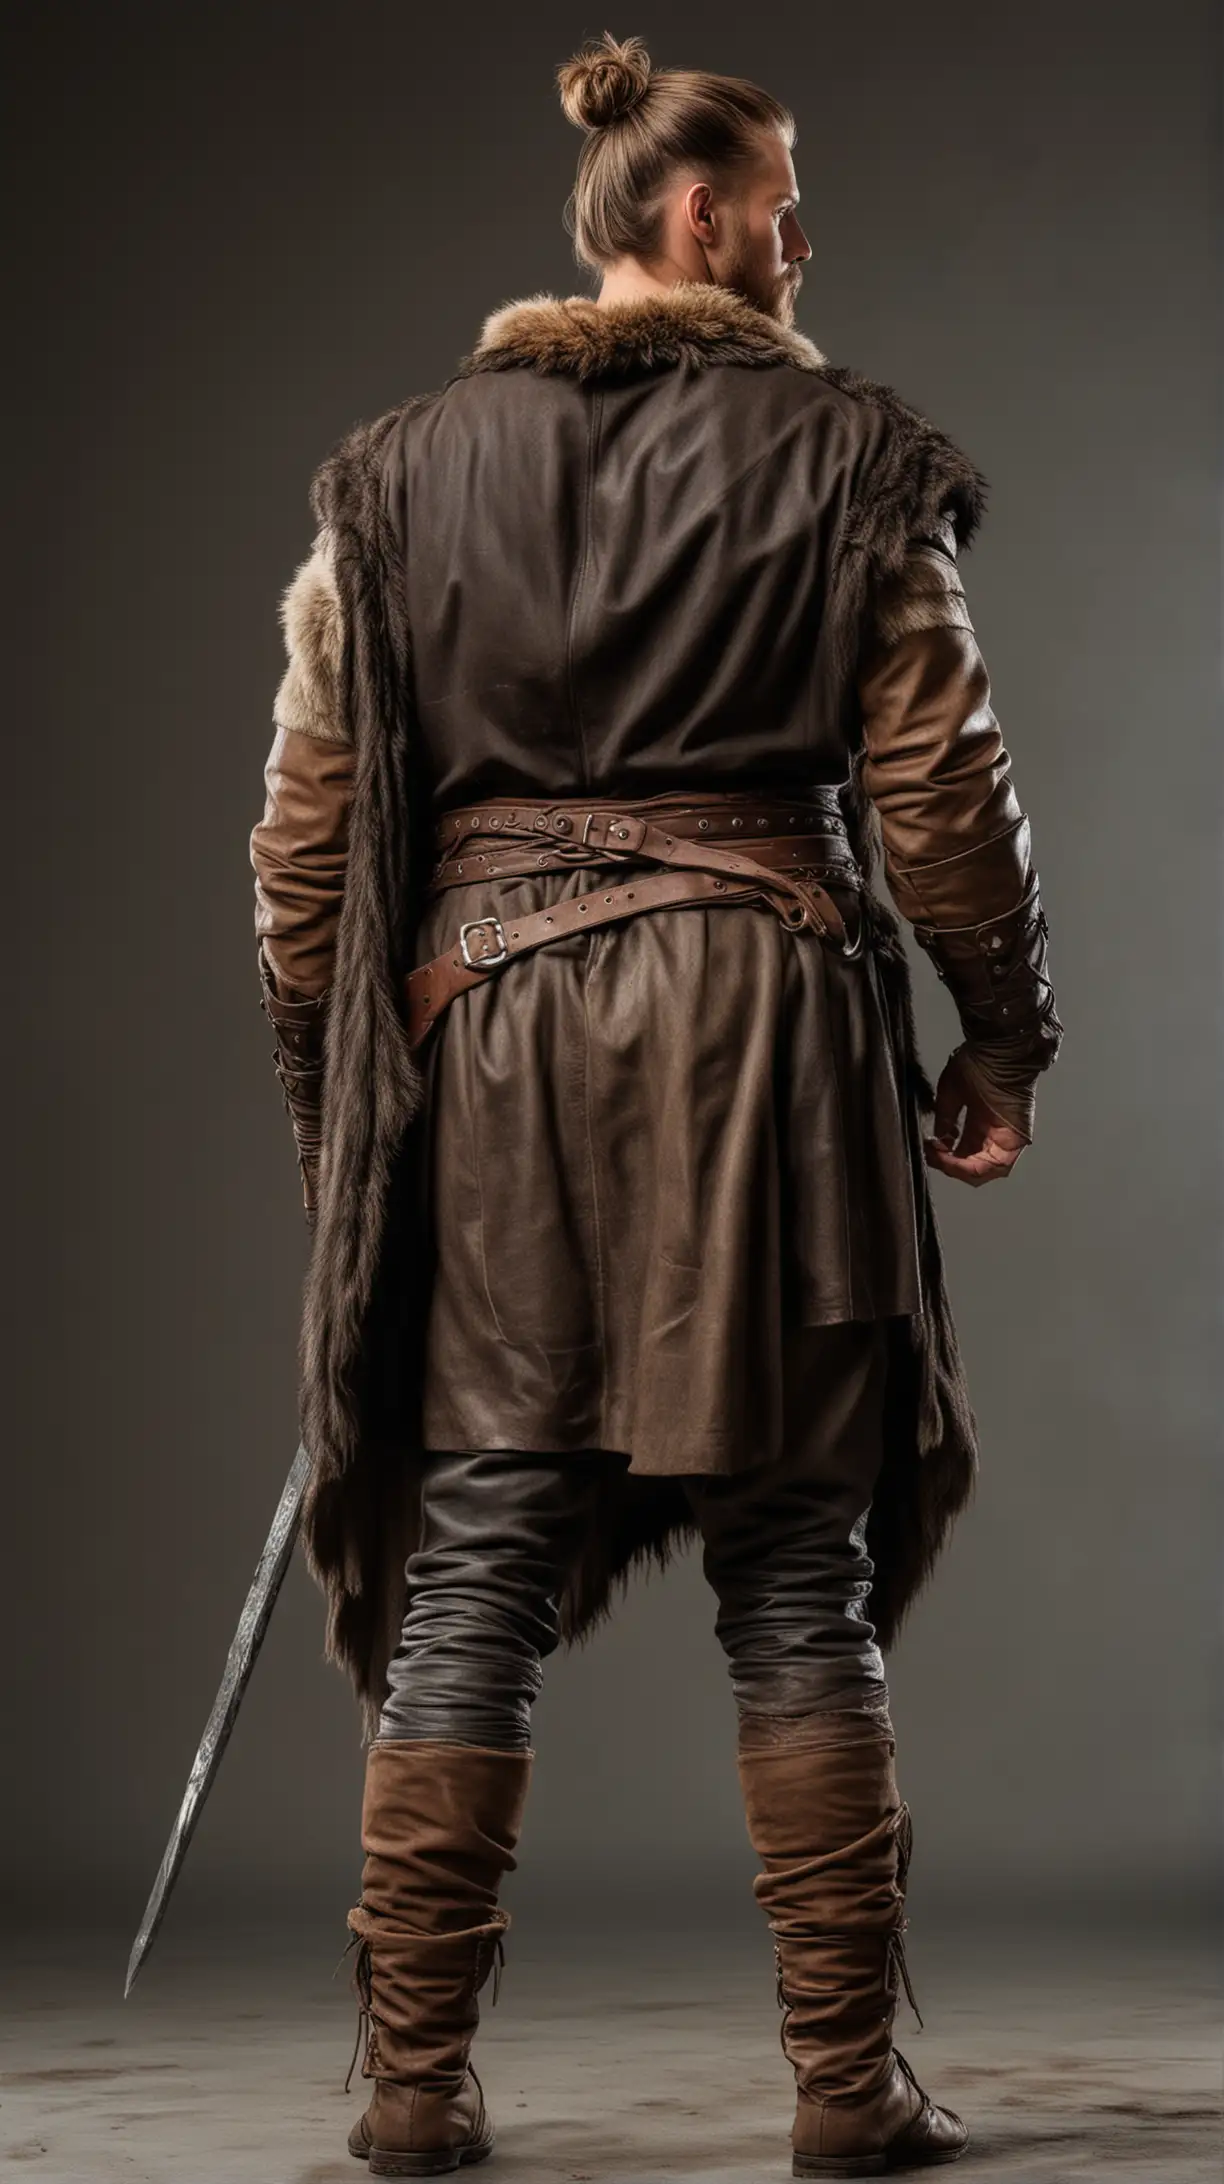 Muscular Viking Warrior in Fur and Leather Garb